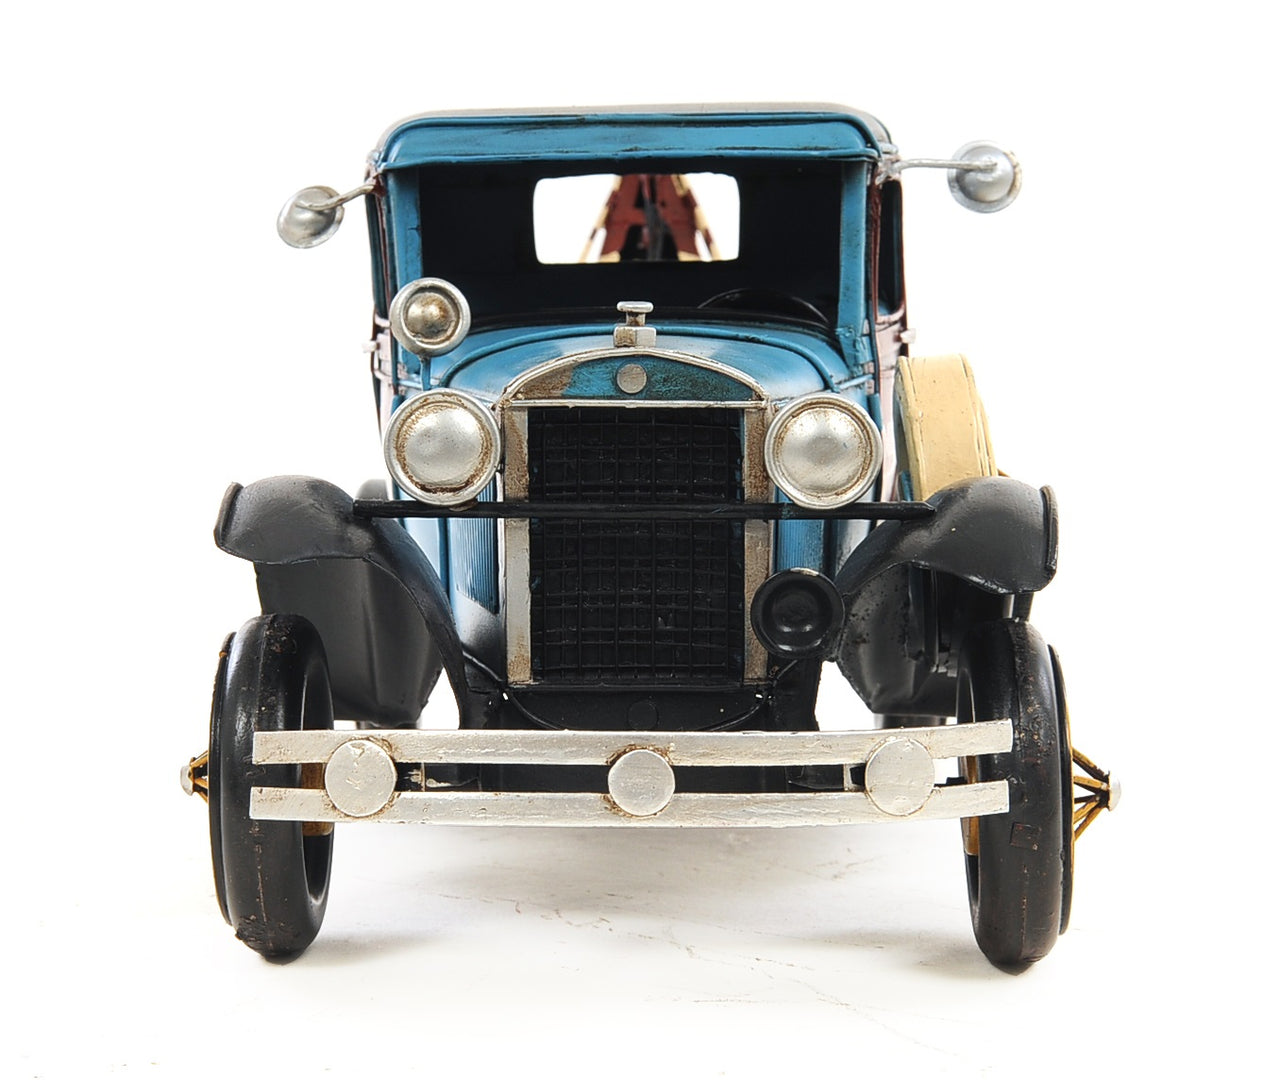 1931 Ford Model A Tow Truck 1:12 Scale Model